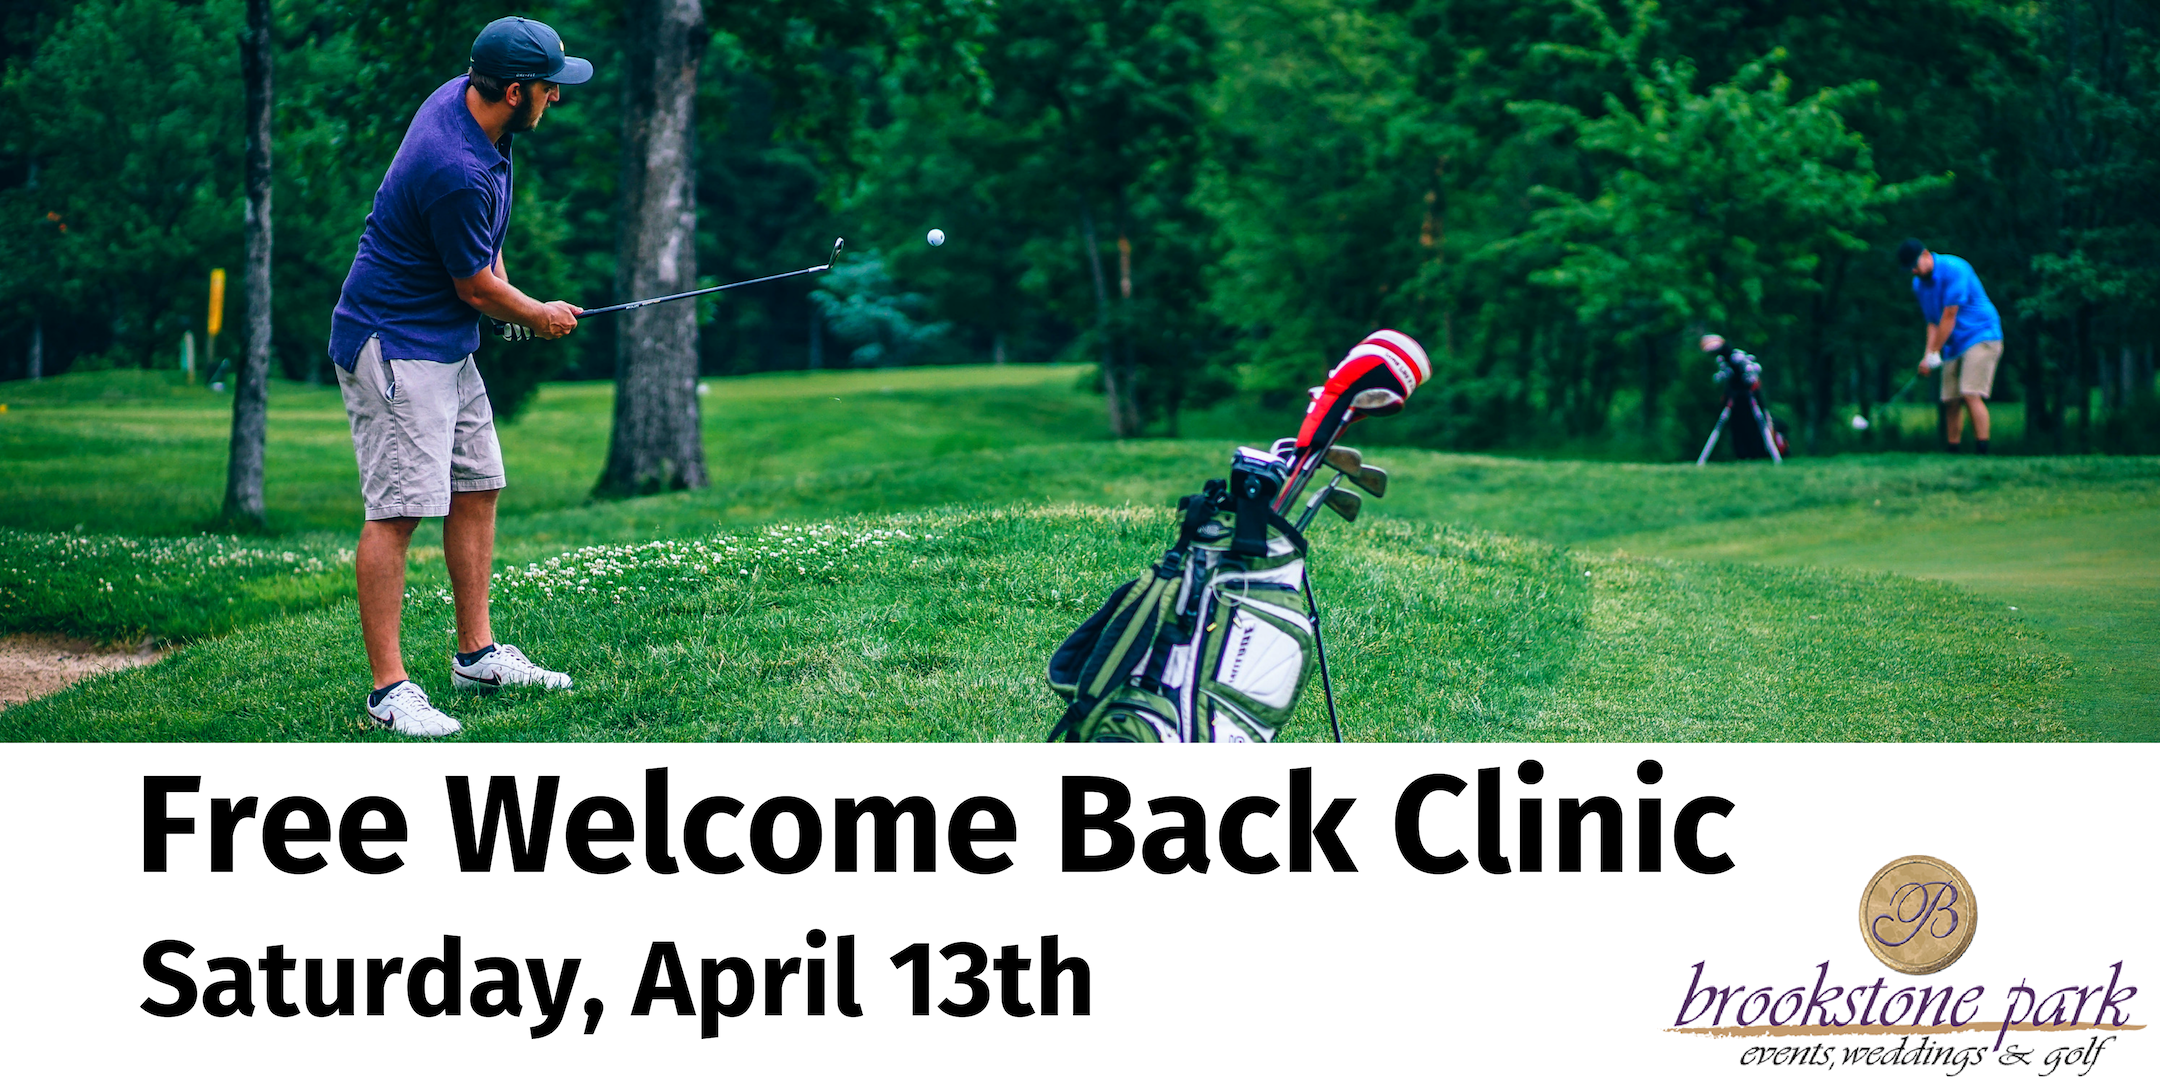 Free Welcome Back Golf Clinic at Brookstone Park